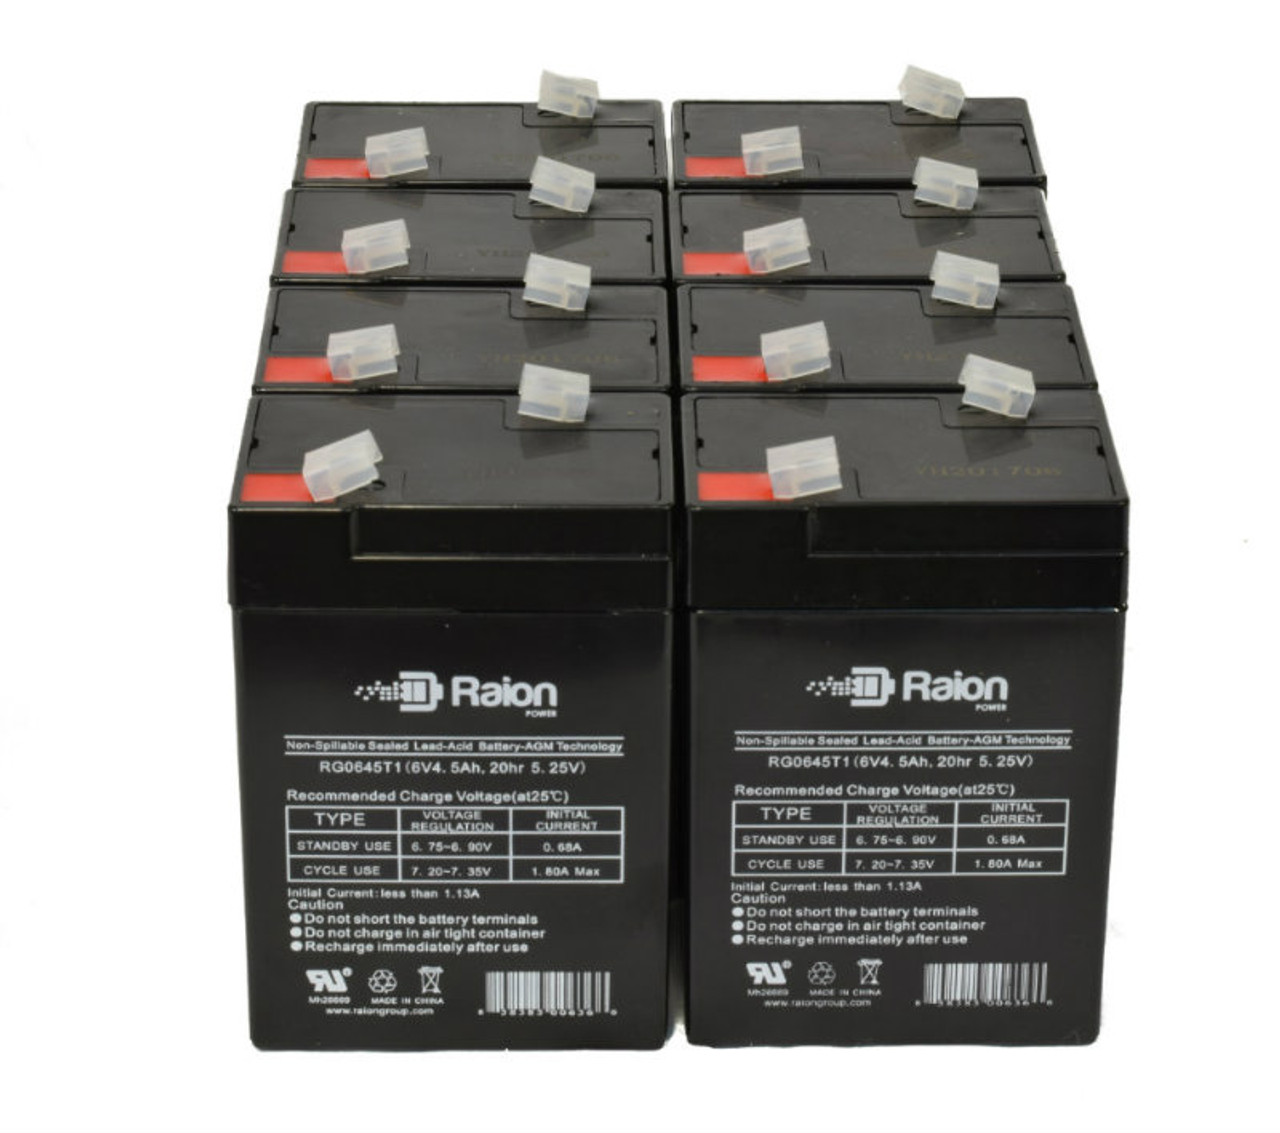 Raion Power 6 Volt 4.5Ah RG0645T1 Replacement Battery for XNB SN06004 - 8 Pack